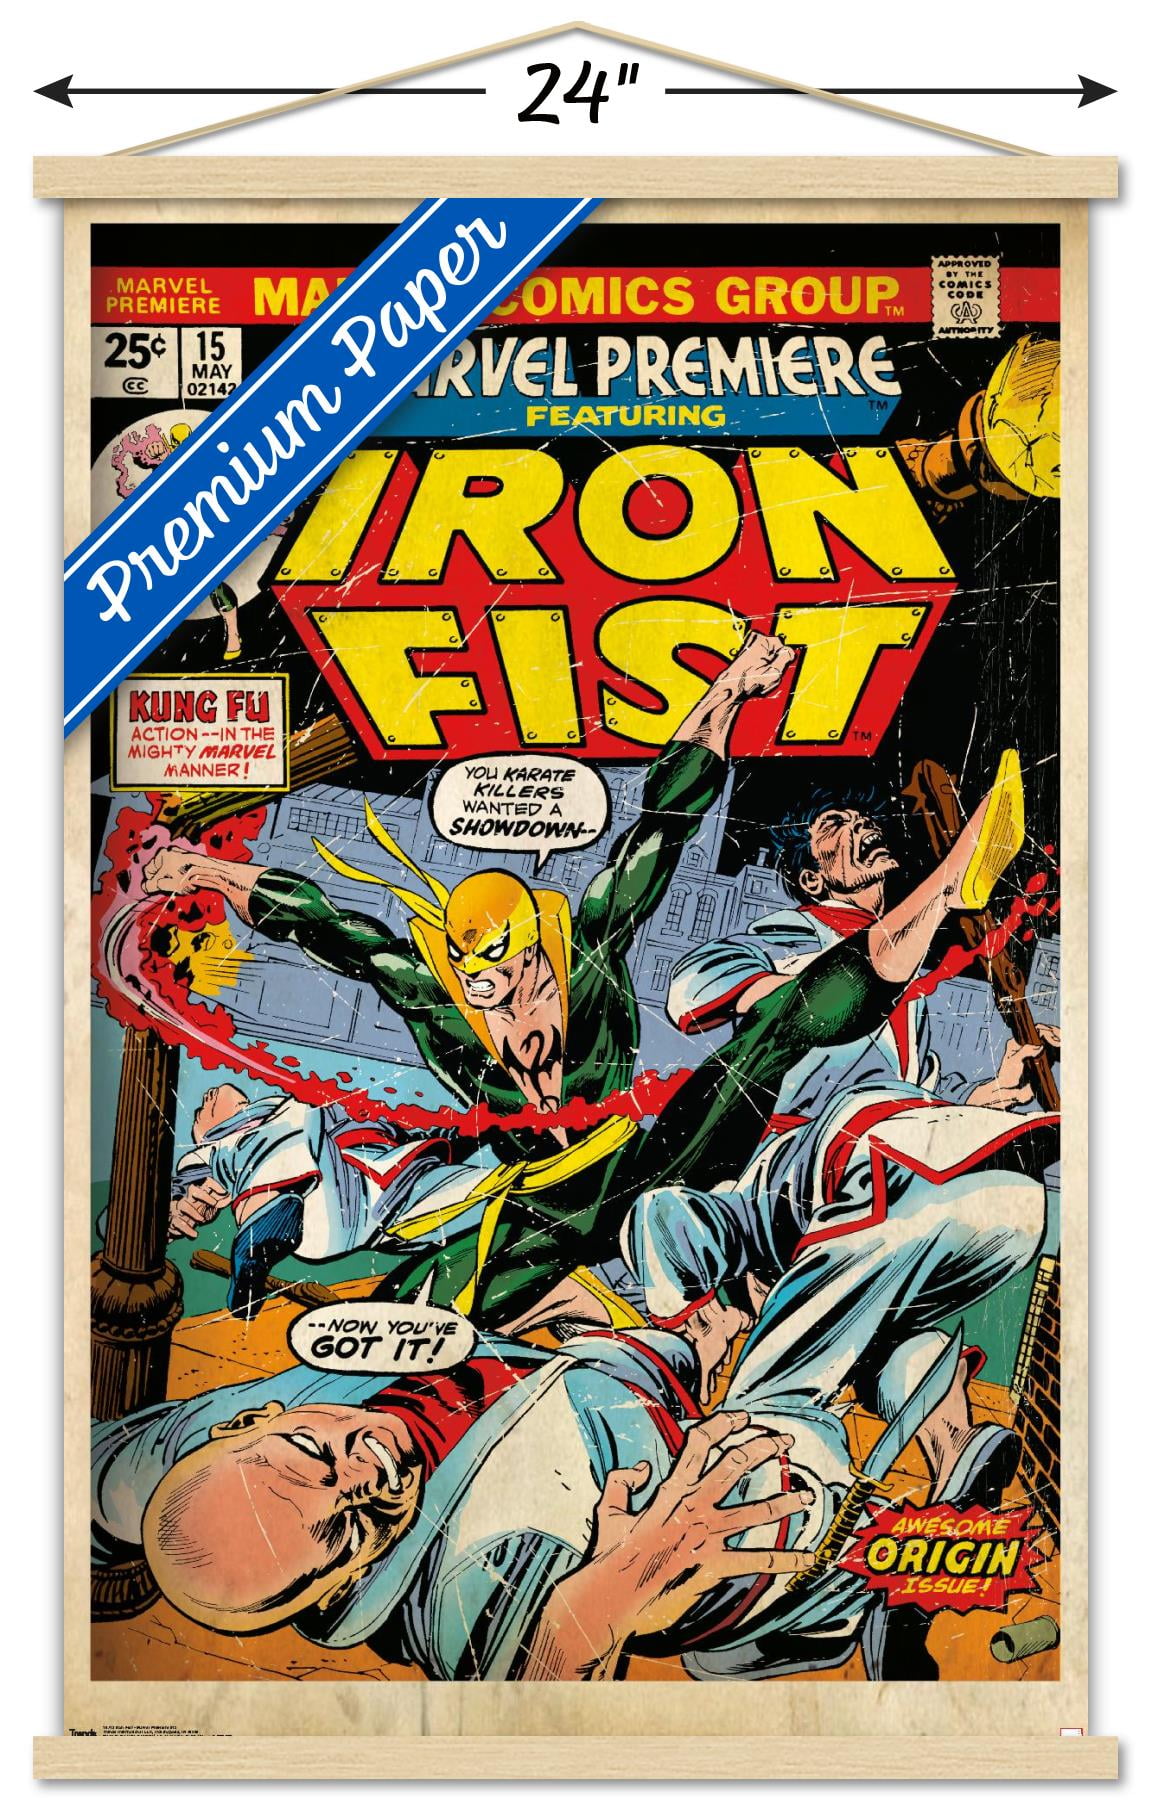 Iron Fist 🤜🏻Póster Epic Yellow Sun and Clouds ⛅️ BVE